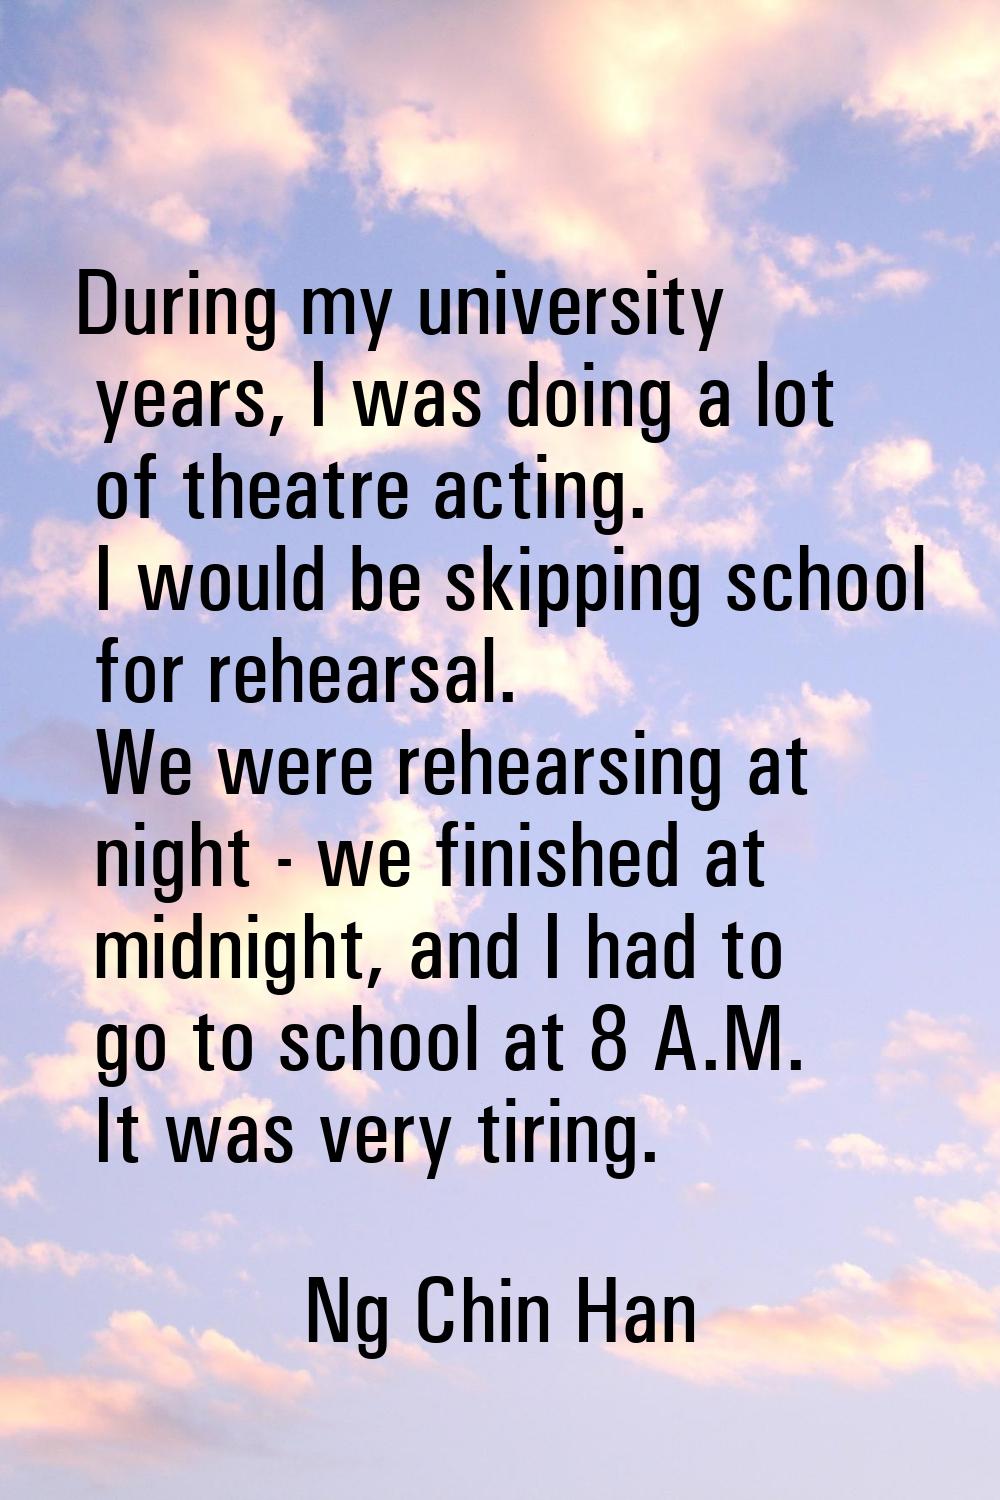 During my university years, I was doing a lot of theatre acting. I would be skipping school for reh